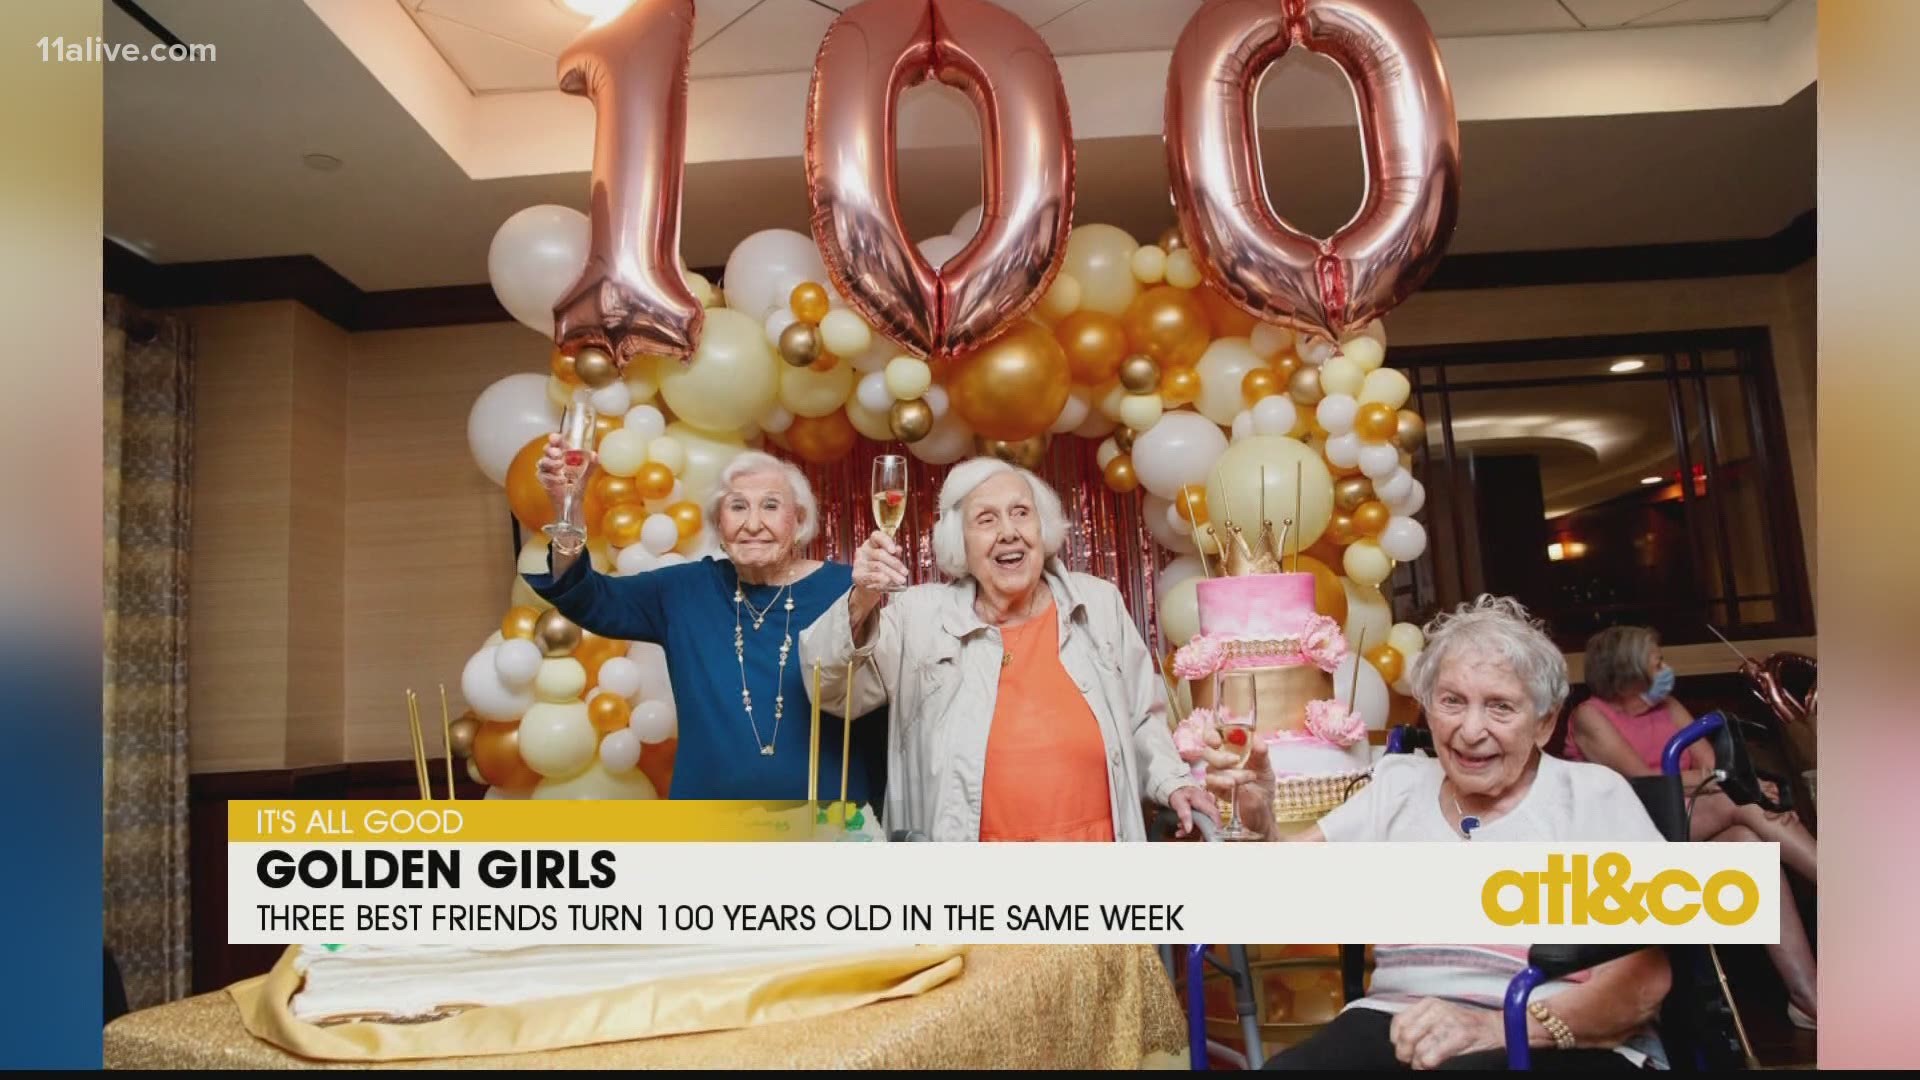 Real-life 'Golden Girls' Ruth, Edith, and Lorraine all live together and celebrated their 100th birthdays in the same week!